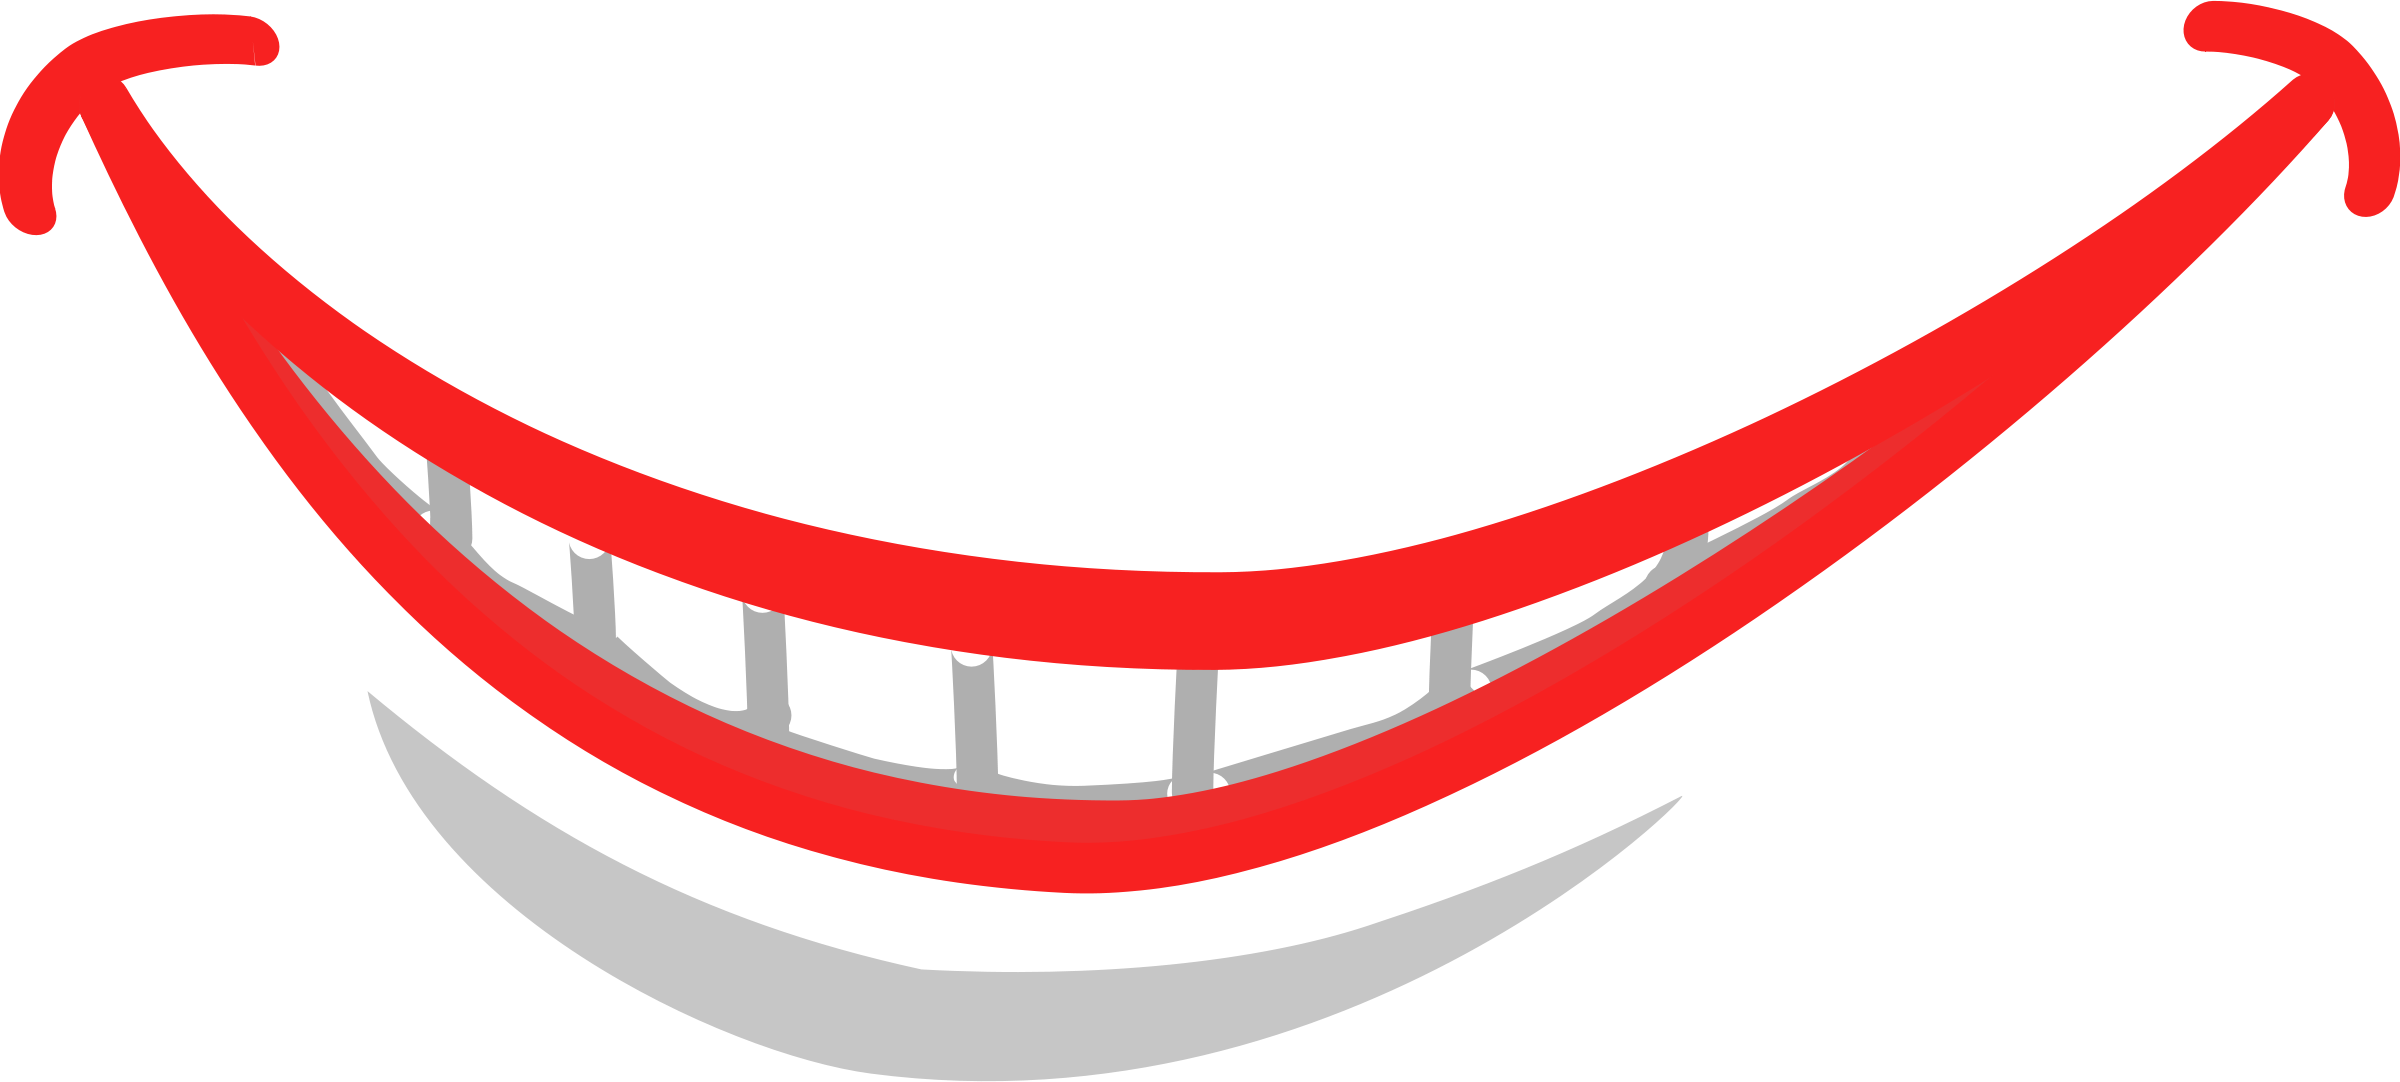 10 Cartoon Mouth Smile   Free Cliparts That You Can Download To You